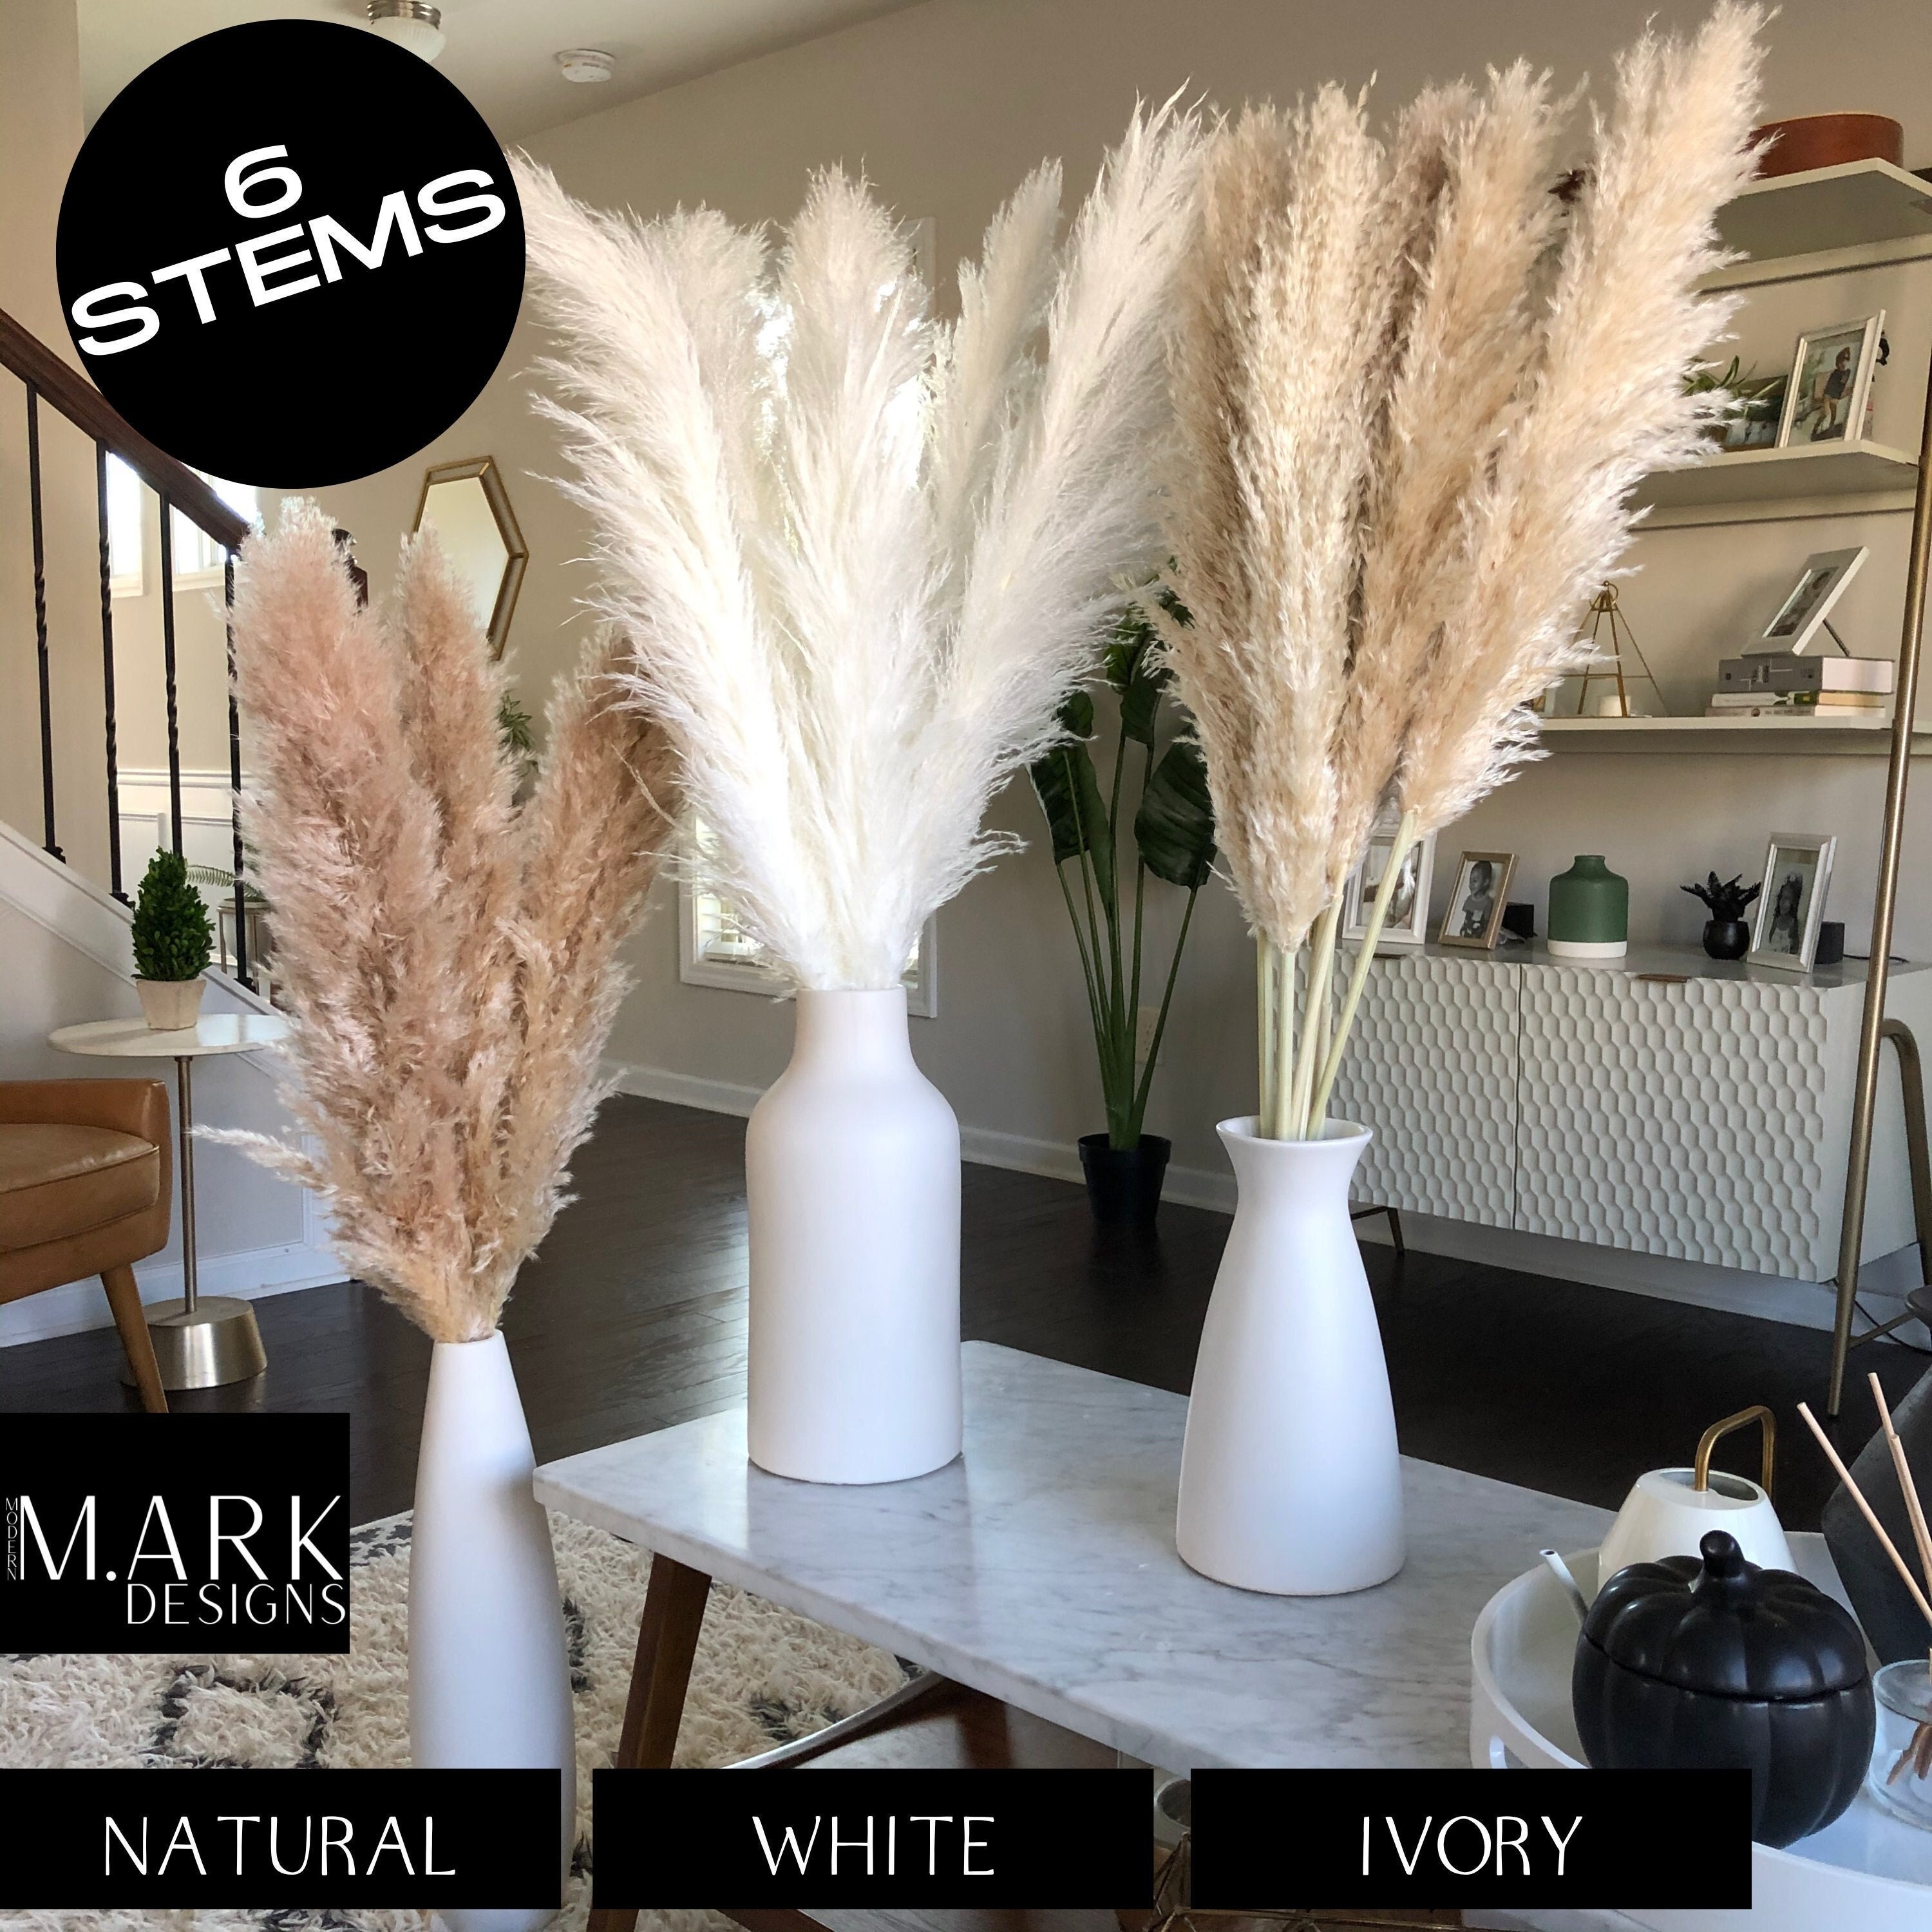 SISETOP Purse Vase, Tall White Vase for Pampas Grass, Creative Handbag Vase  with Leather Strap Handle, Ceramic Flower Vase for Centerpieces, Home